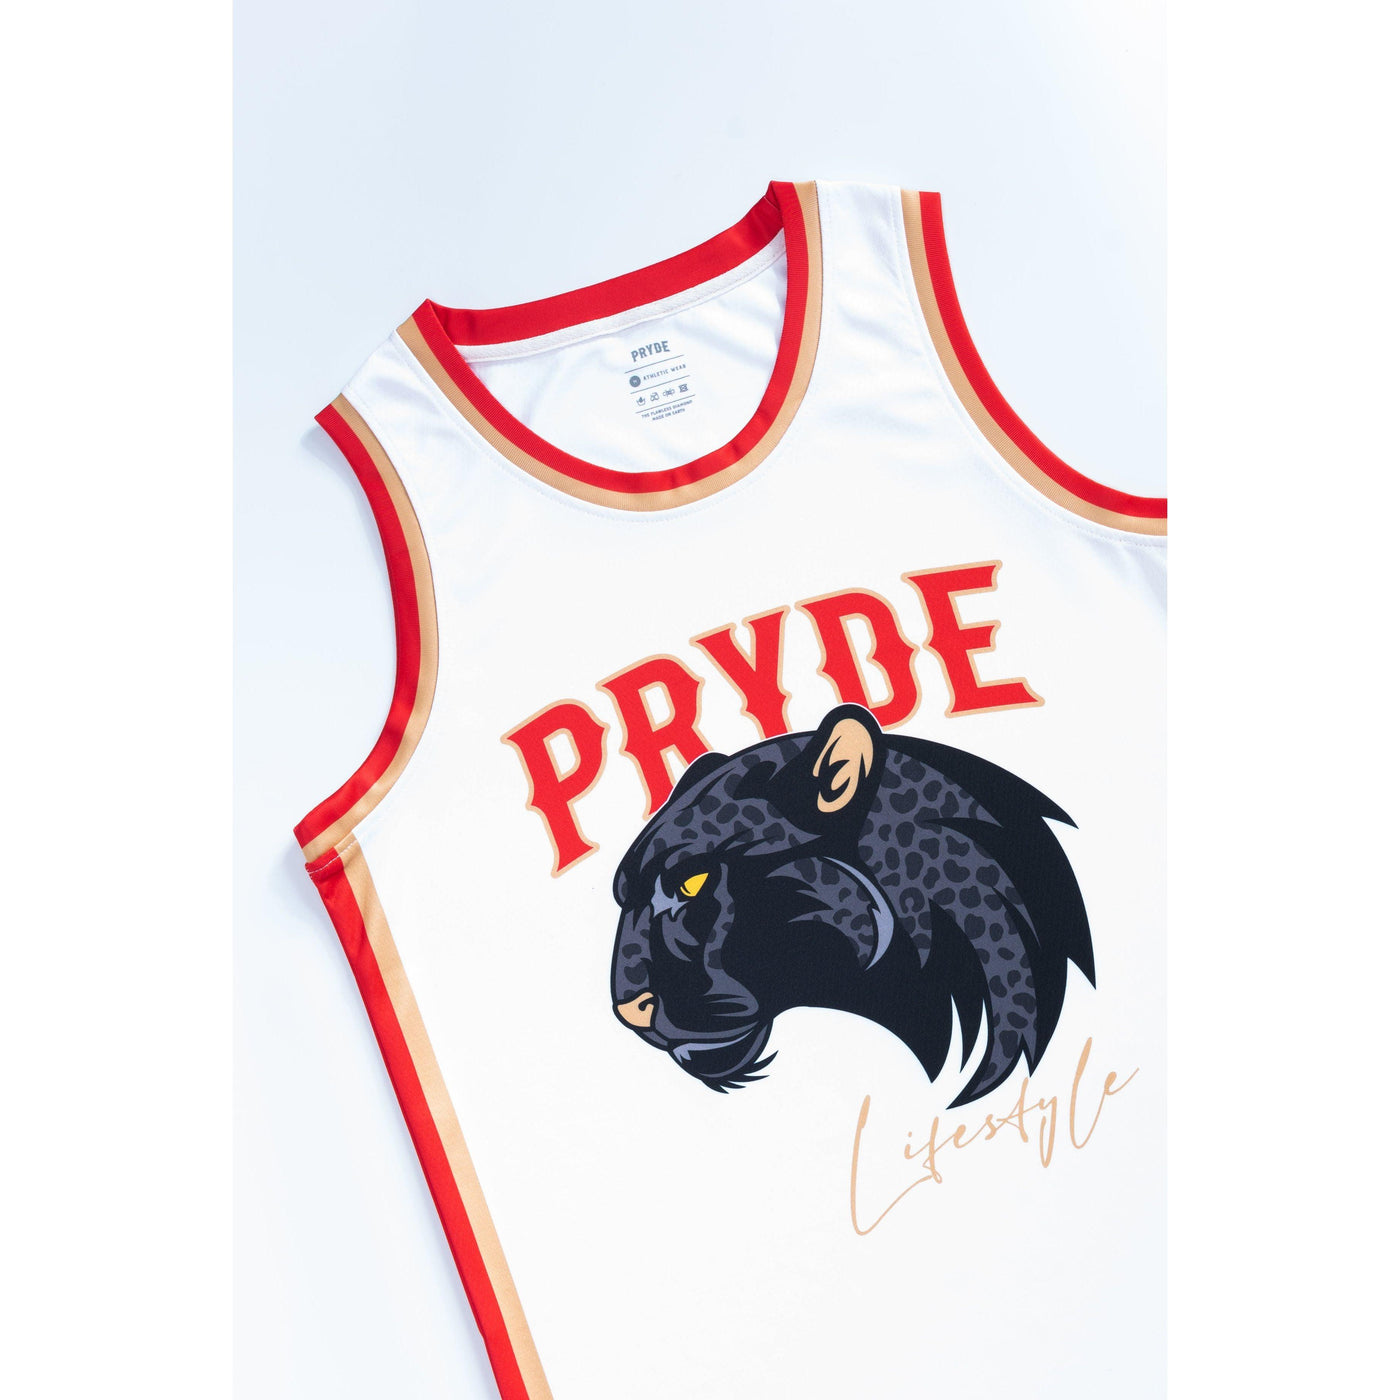 PRYDE Leopard Jersey - White, Red & Gold - Muay Thailand